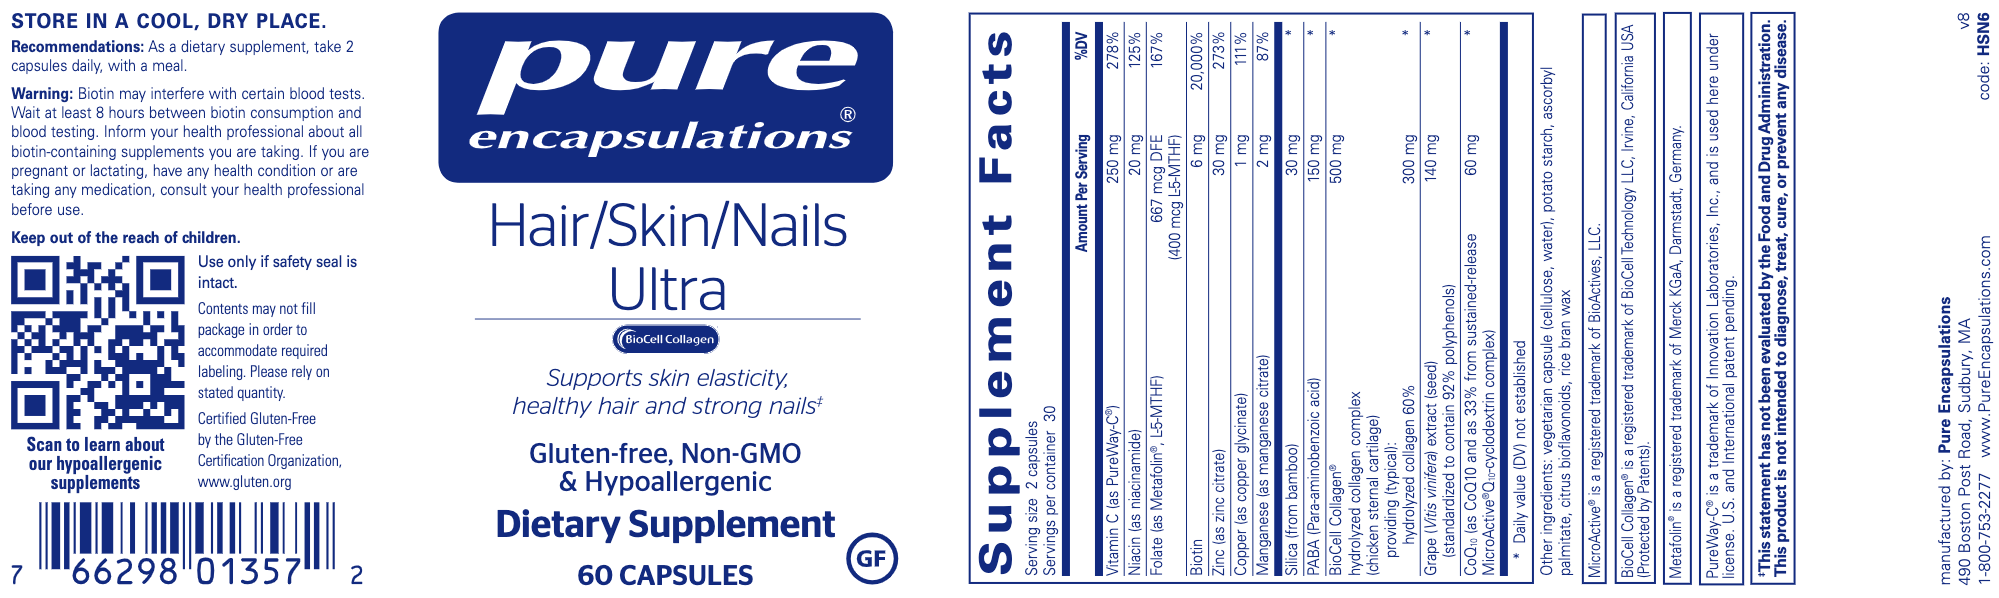 Hair/Skin/Nails Ultra (60 Capsules)-Vitamins & Supplements-Pure Encapsulations-Pine Street Clinic